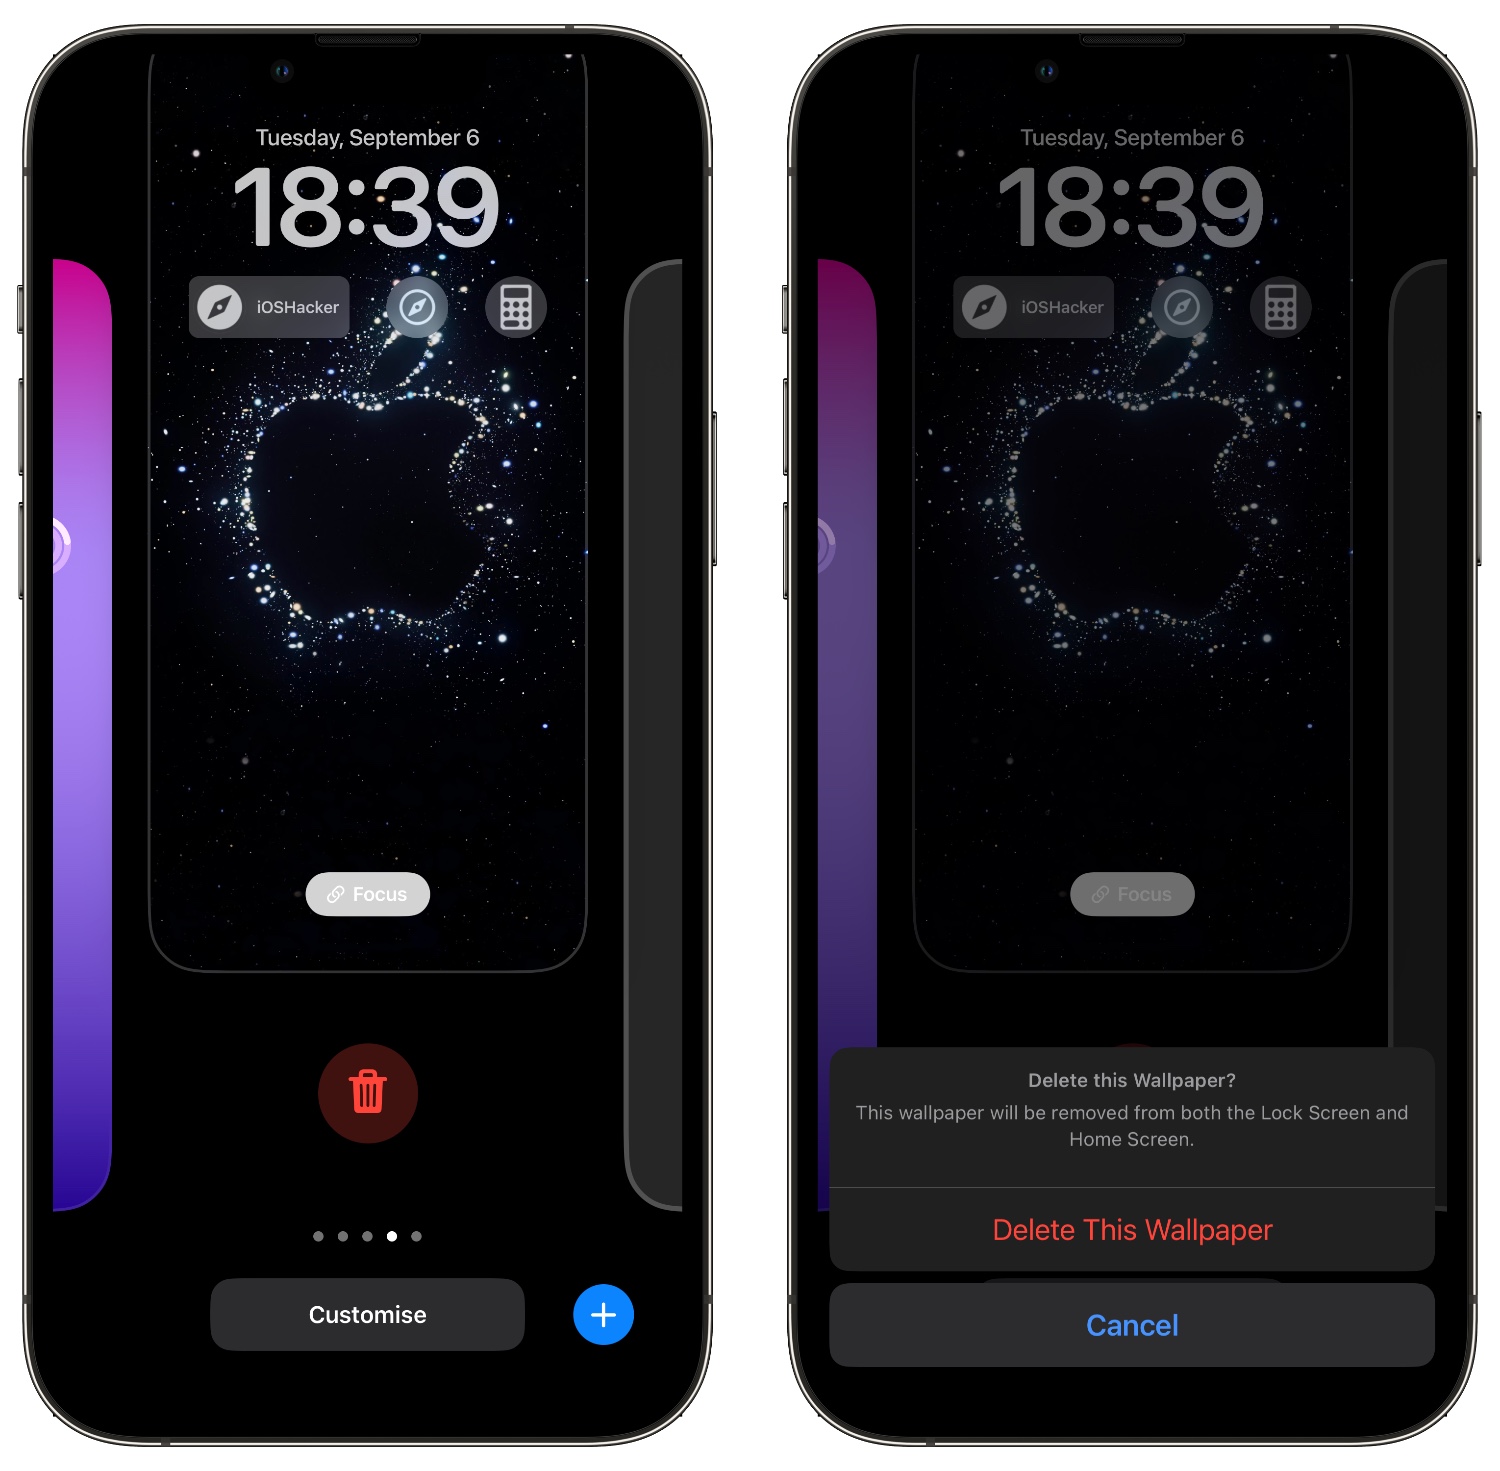 How To Add Or Remove Lock Screen Wallpaper From iPhone's Lock Screen  Gallery - iOS Hacker